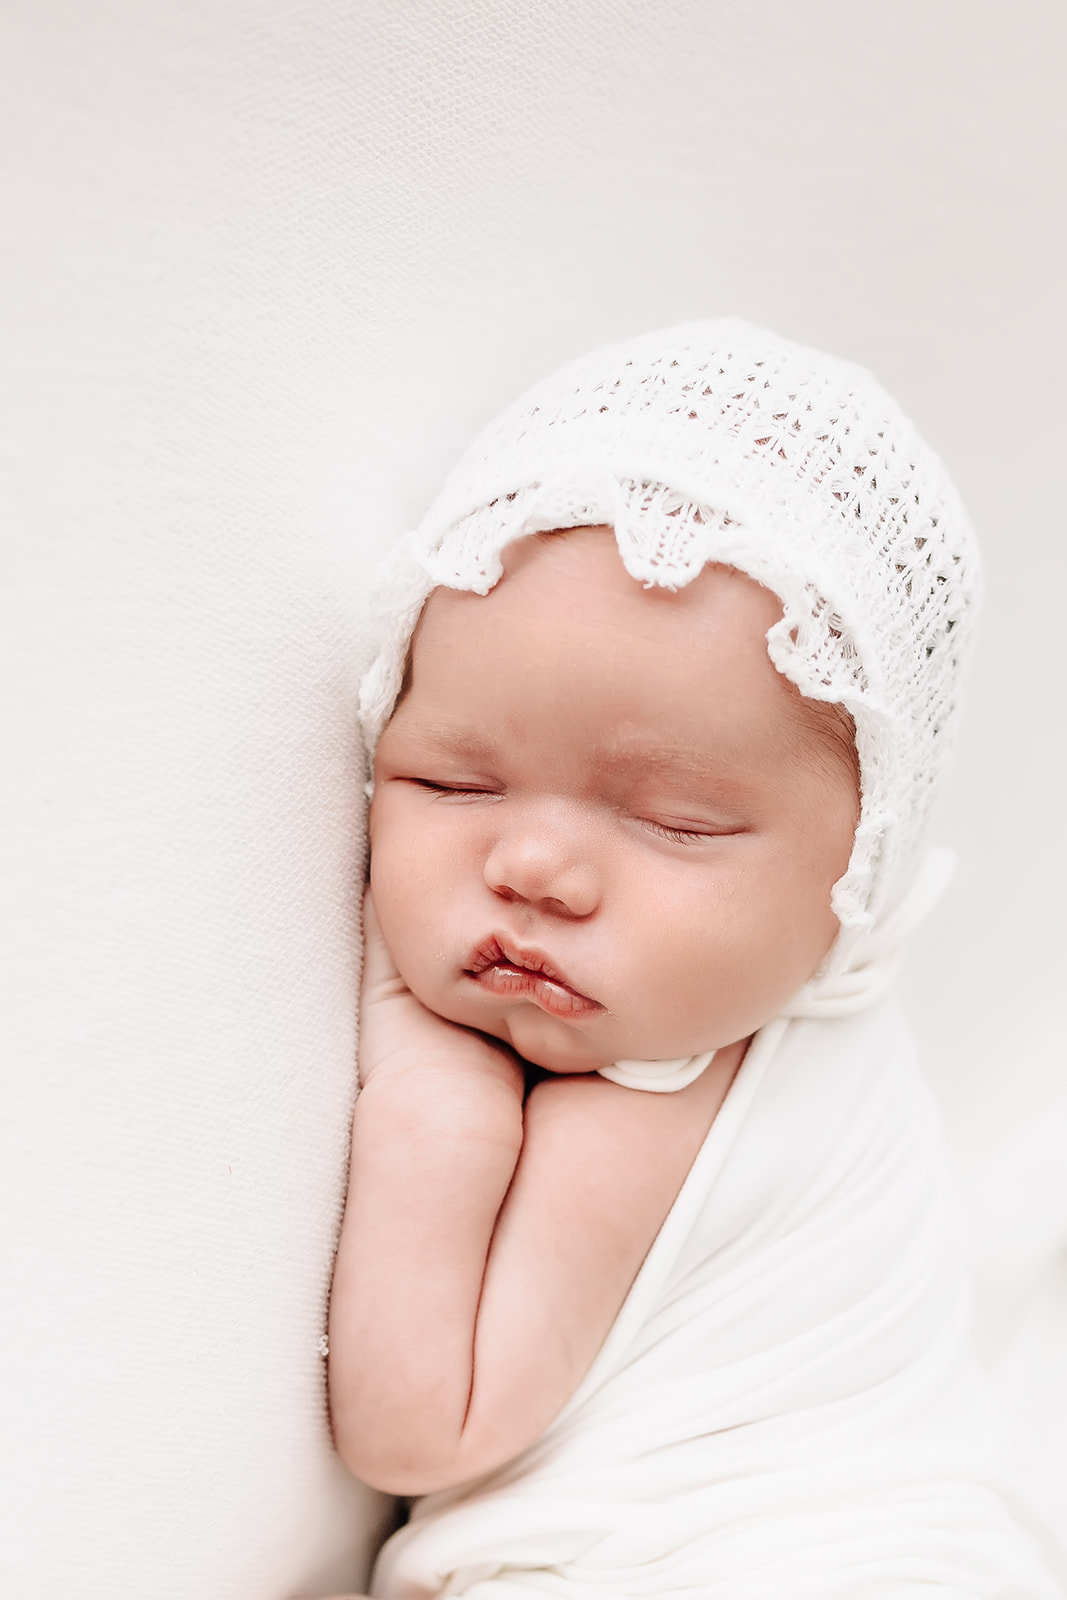 A newborn baby sleeps while wearing a white lace bonnet St Louis birth center